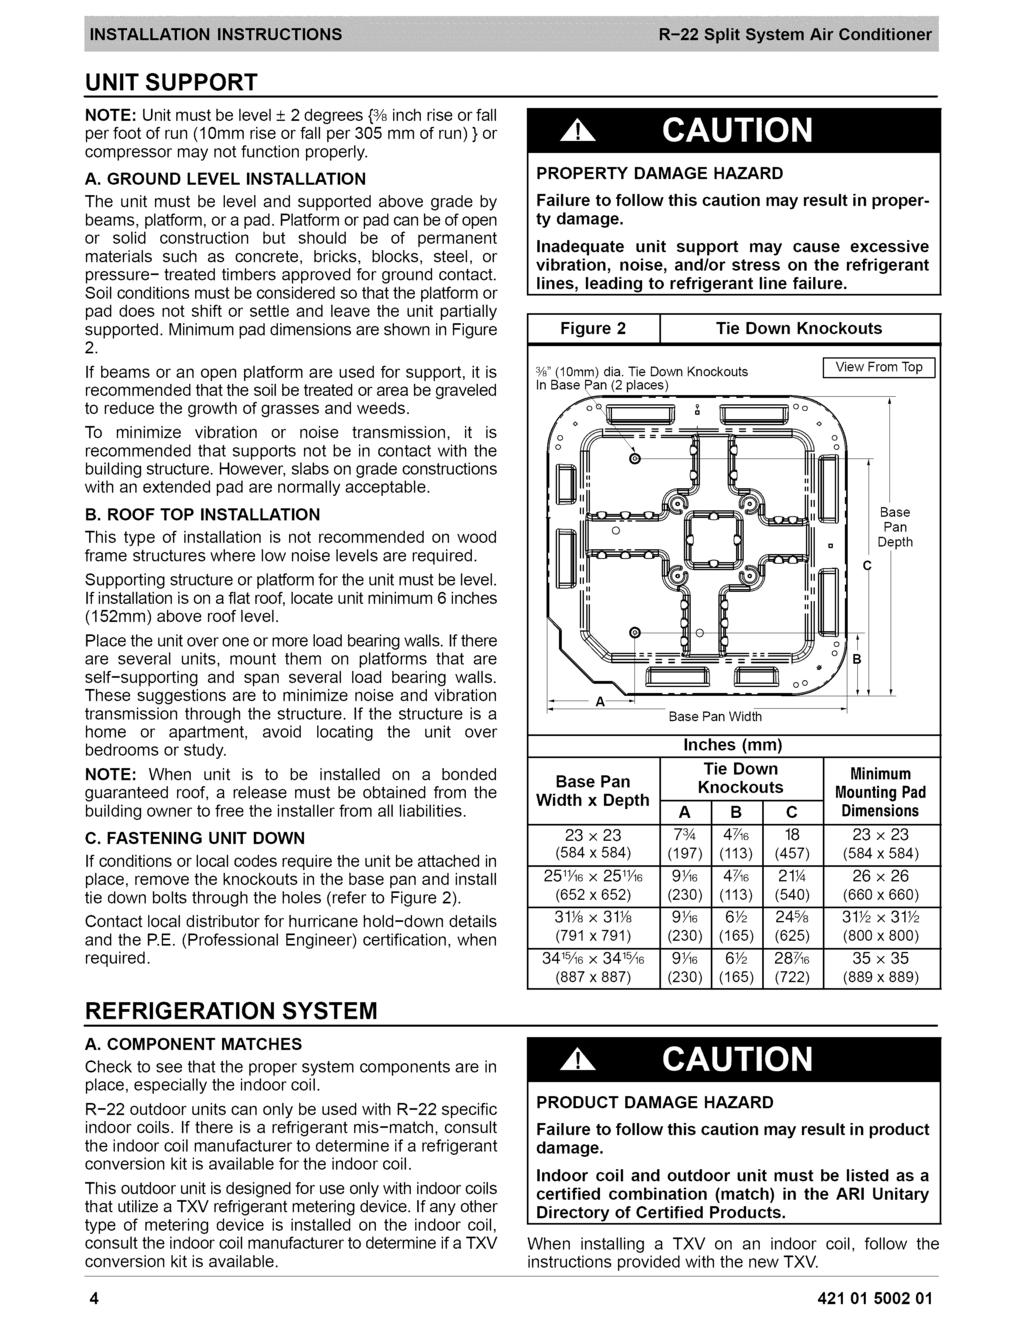 UNIT SUPPORT NOTE: Unit must be level + 2 degrees {% inch rise or fall per foot of run (10mm rise or fall per 305 mm of run) } or compressor may not function properly. A.